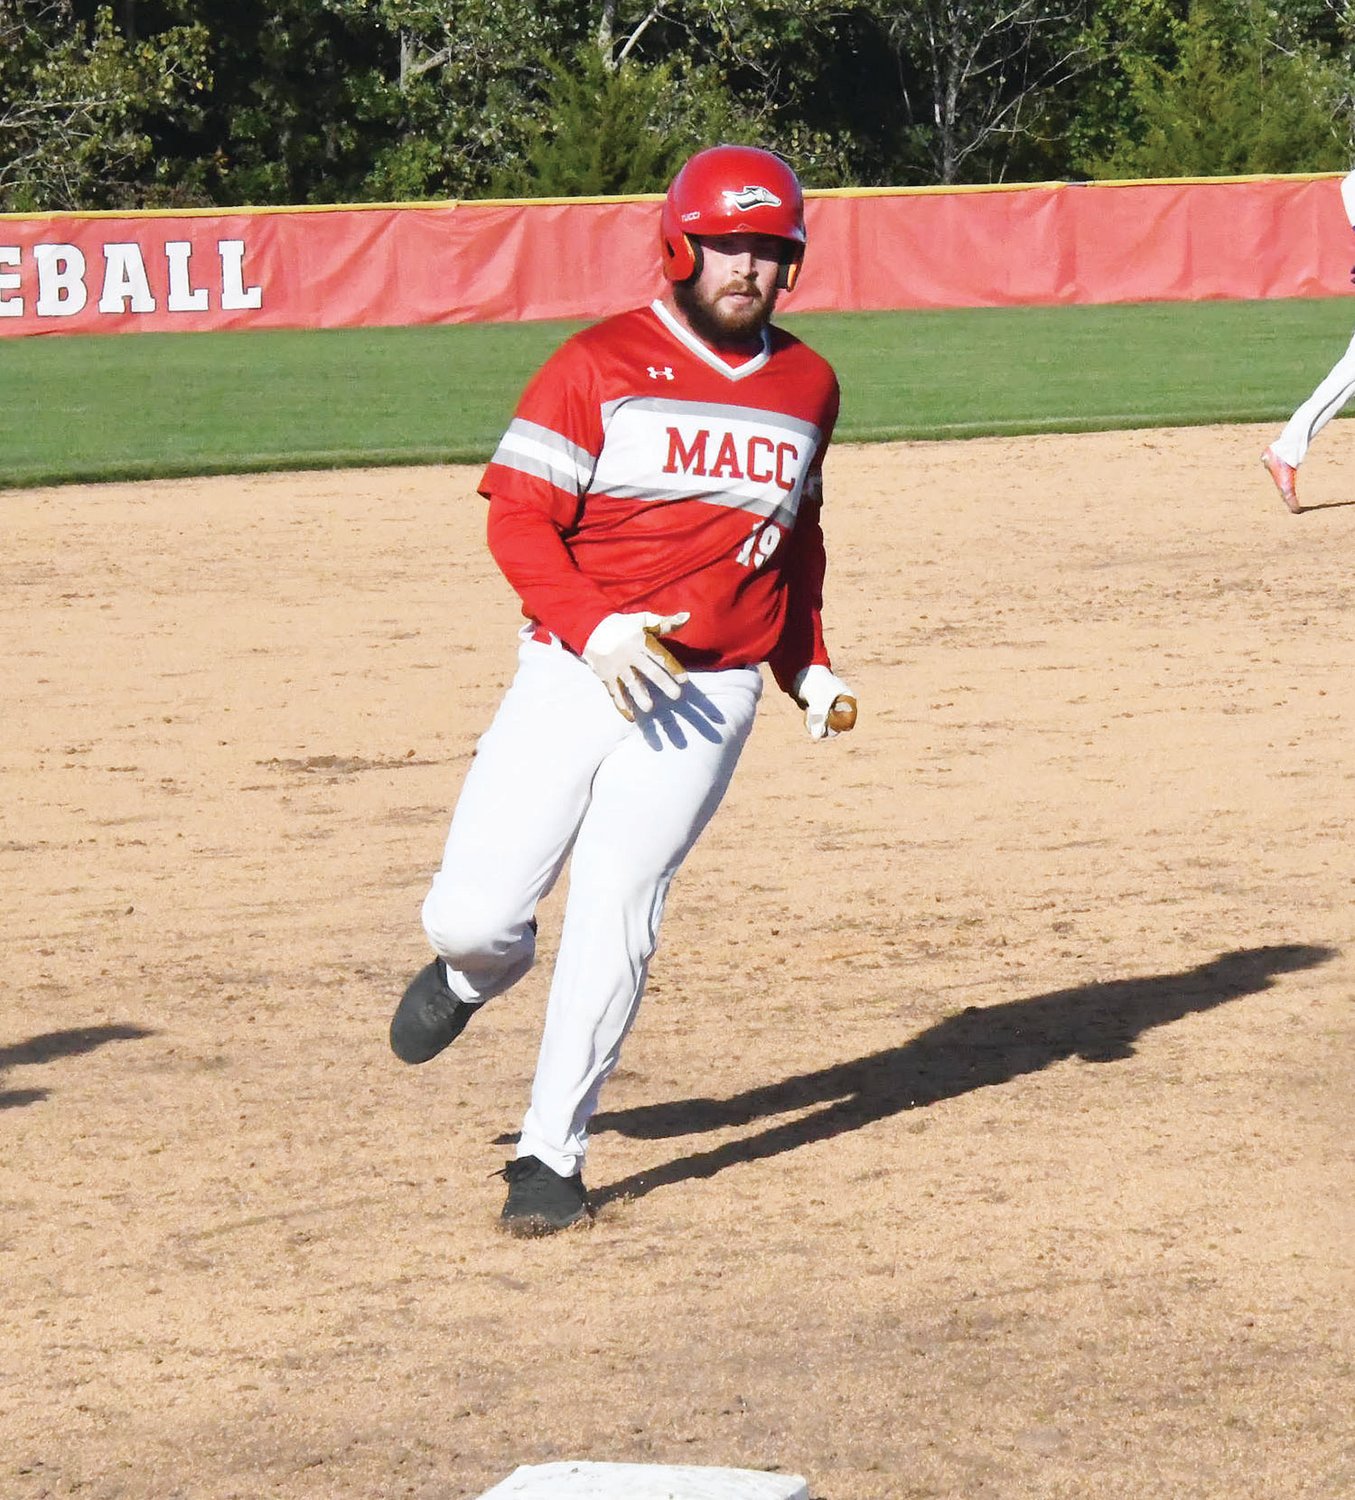 Moberly Area Community College baseball player Jack Prewett runs to third base during a scrimmage against Lewis & Clark College from Thursday, Sept. 29, at Howard Hils Athletic Complex. Prewett played locally at Cairo High School.